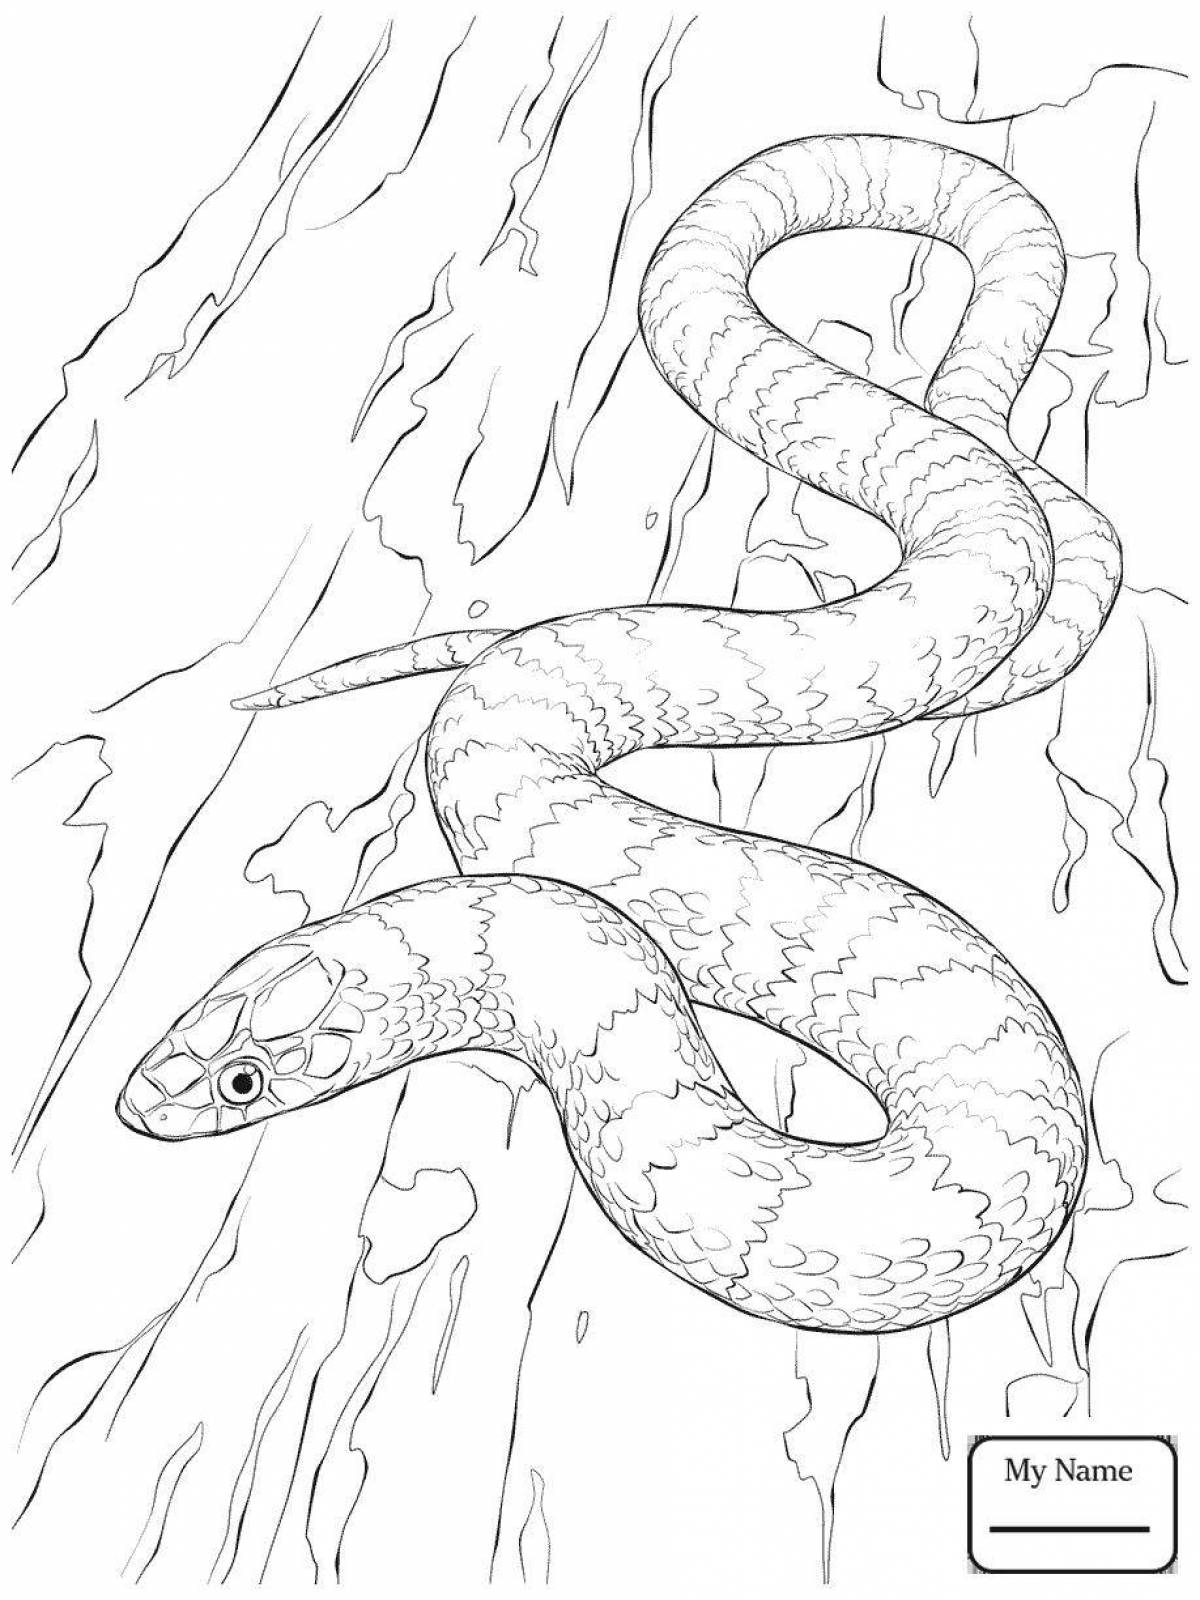 Coloring page magnificent viper